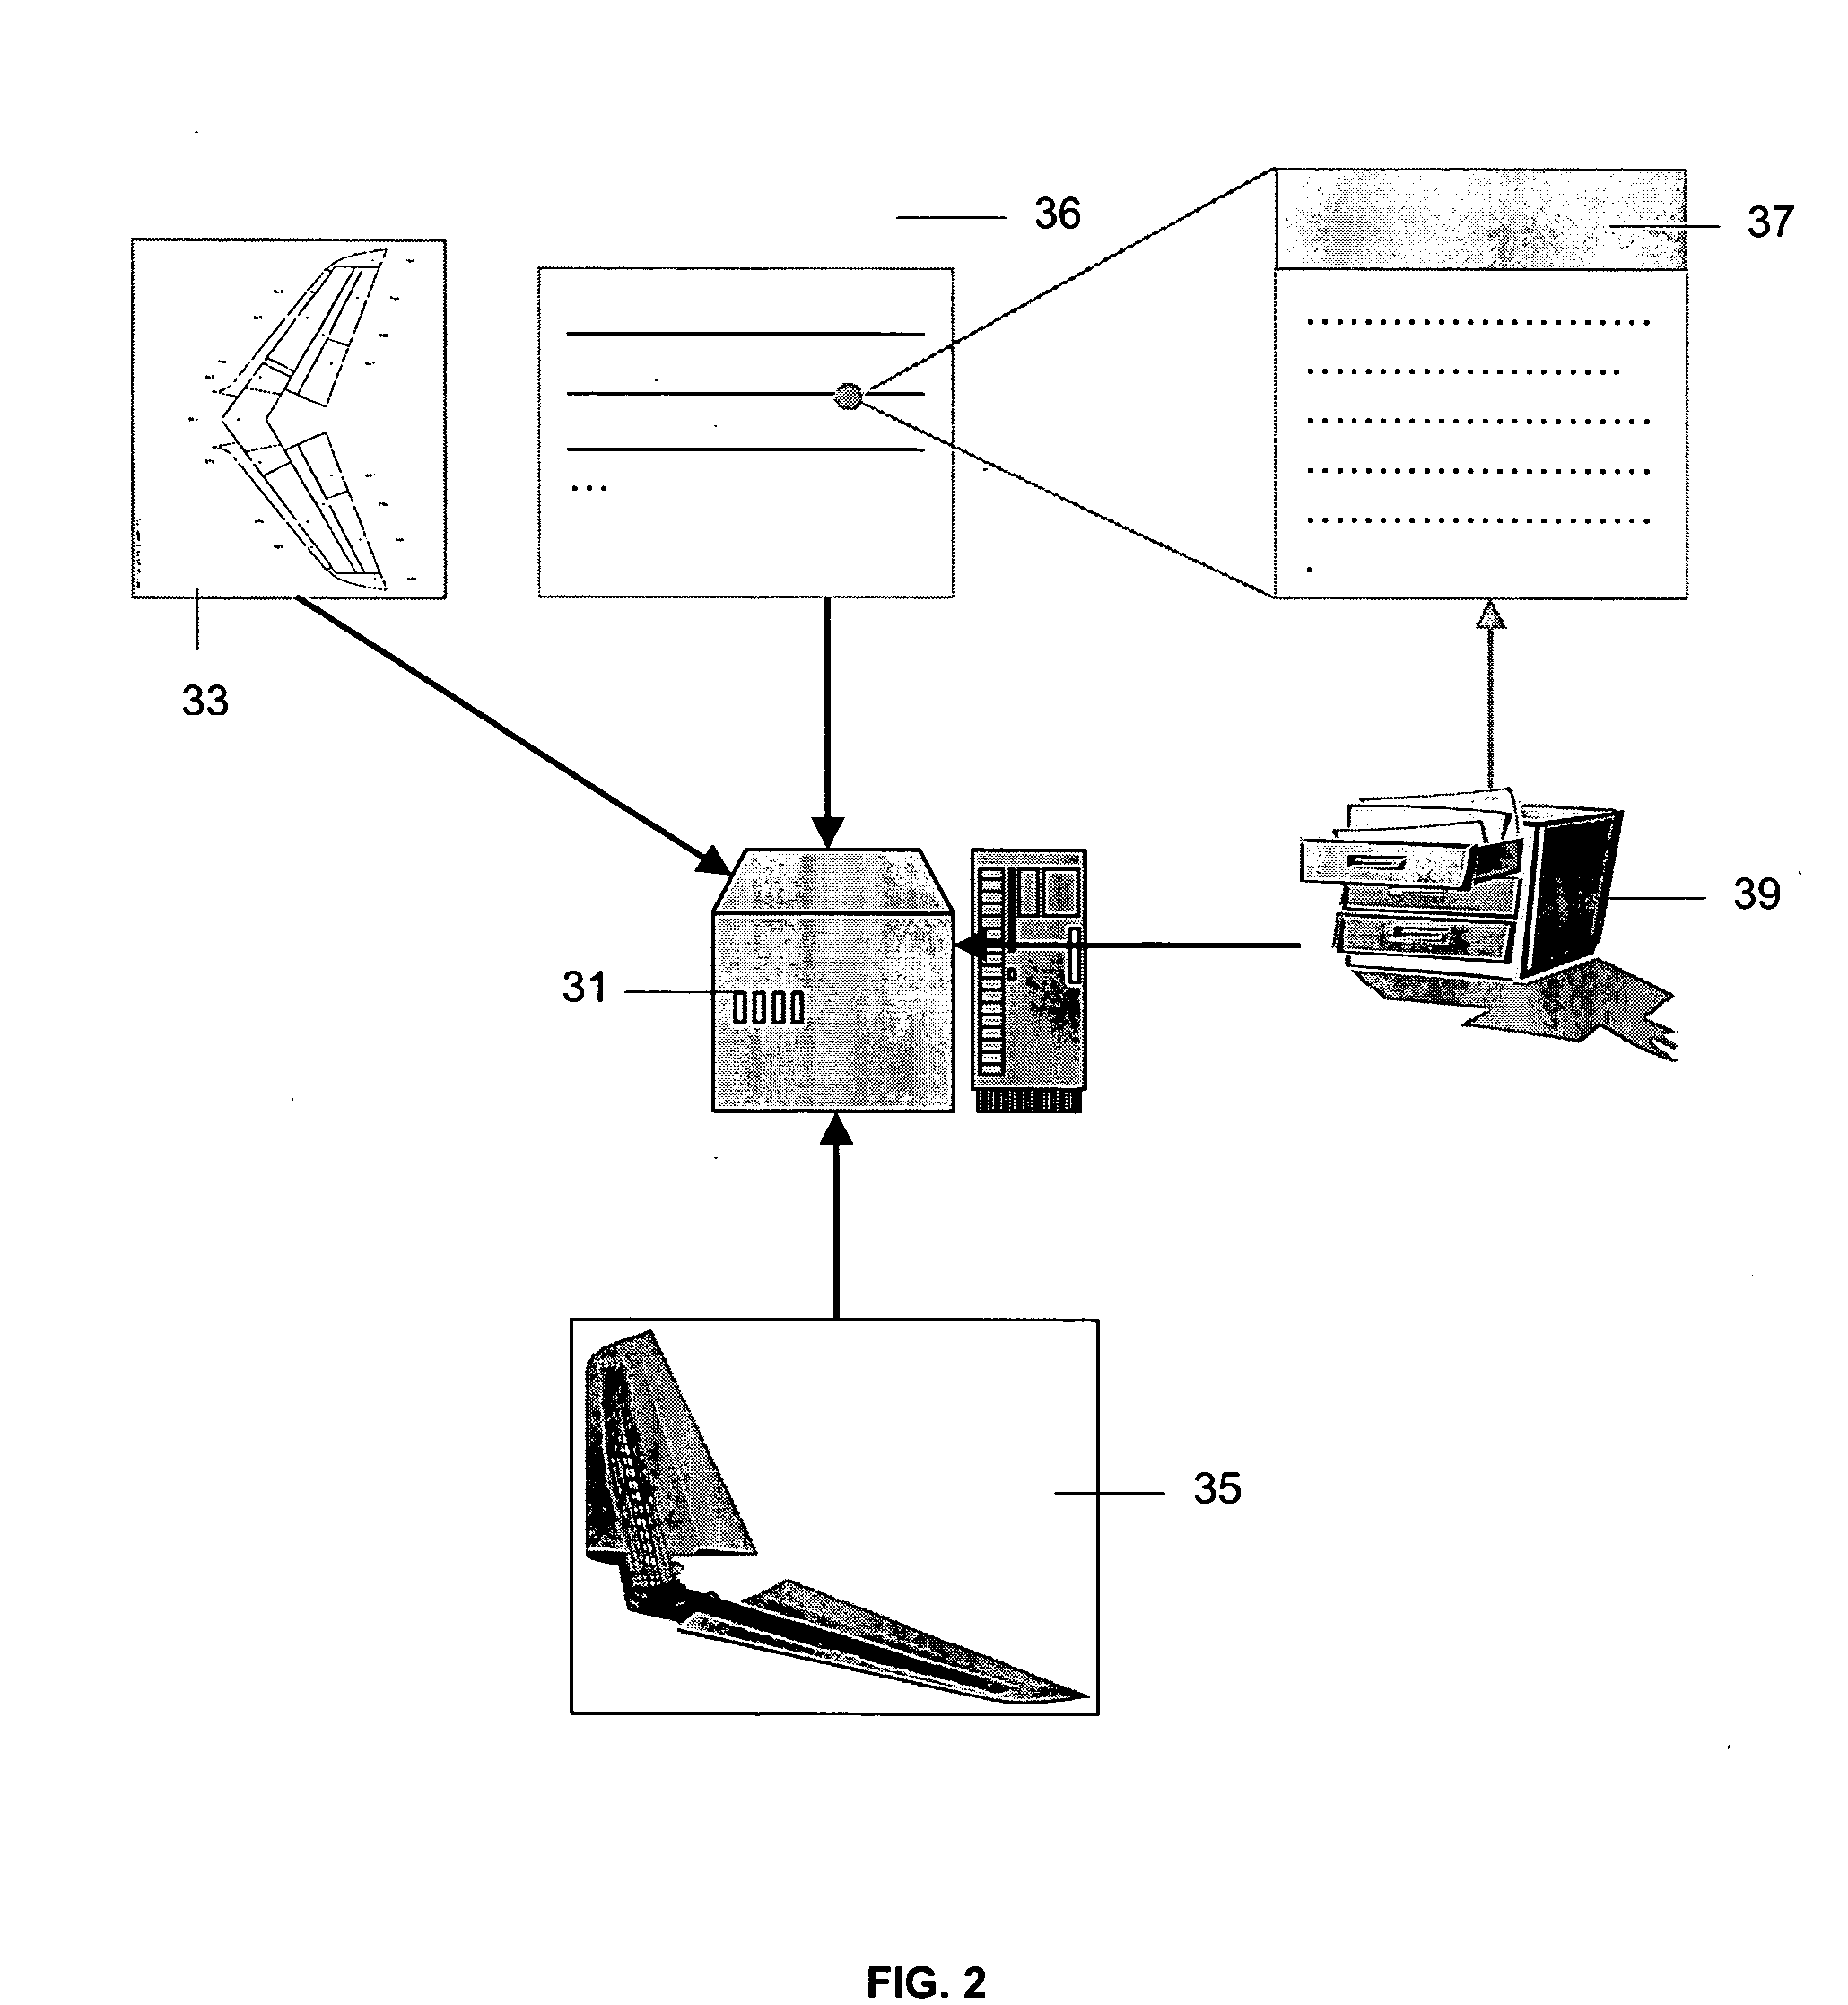 System and method for performing a Zonal Safety Analysis in aircraft design